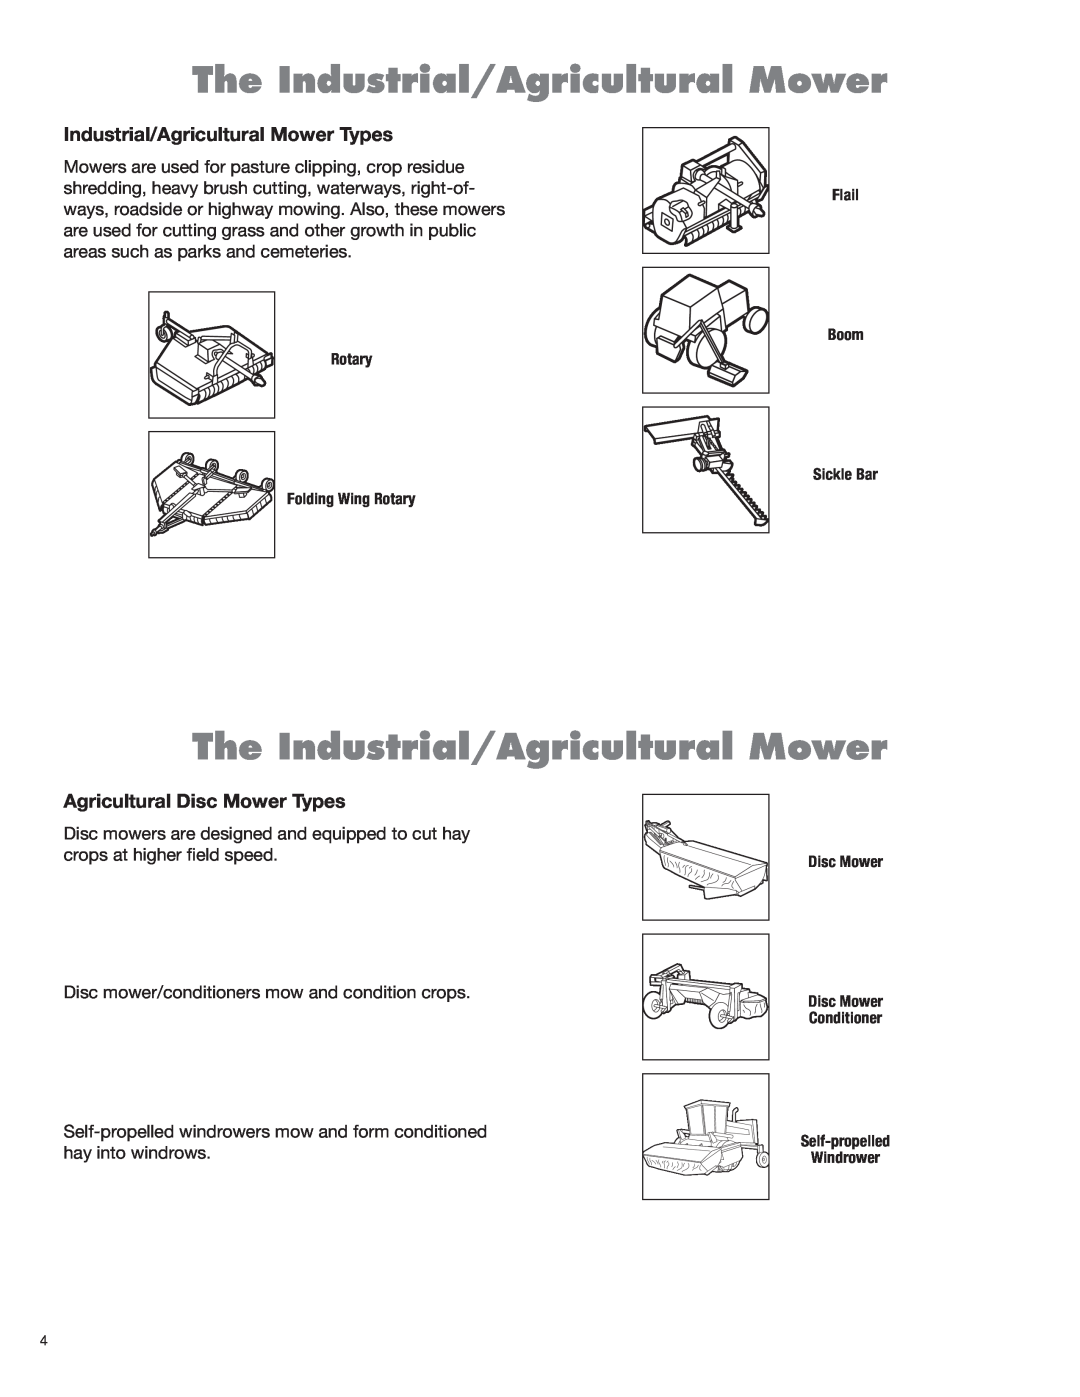 Rhino Mounts RHD88 The Industrial/Agricultural Mower, Industrial/Agricultural Mower Types, Agricultural Disc Mower Types 